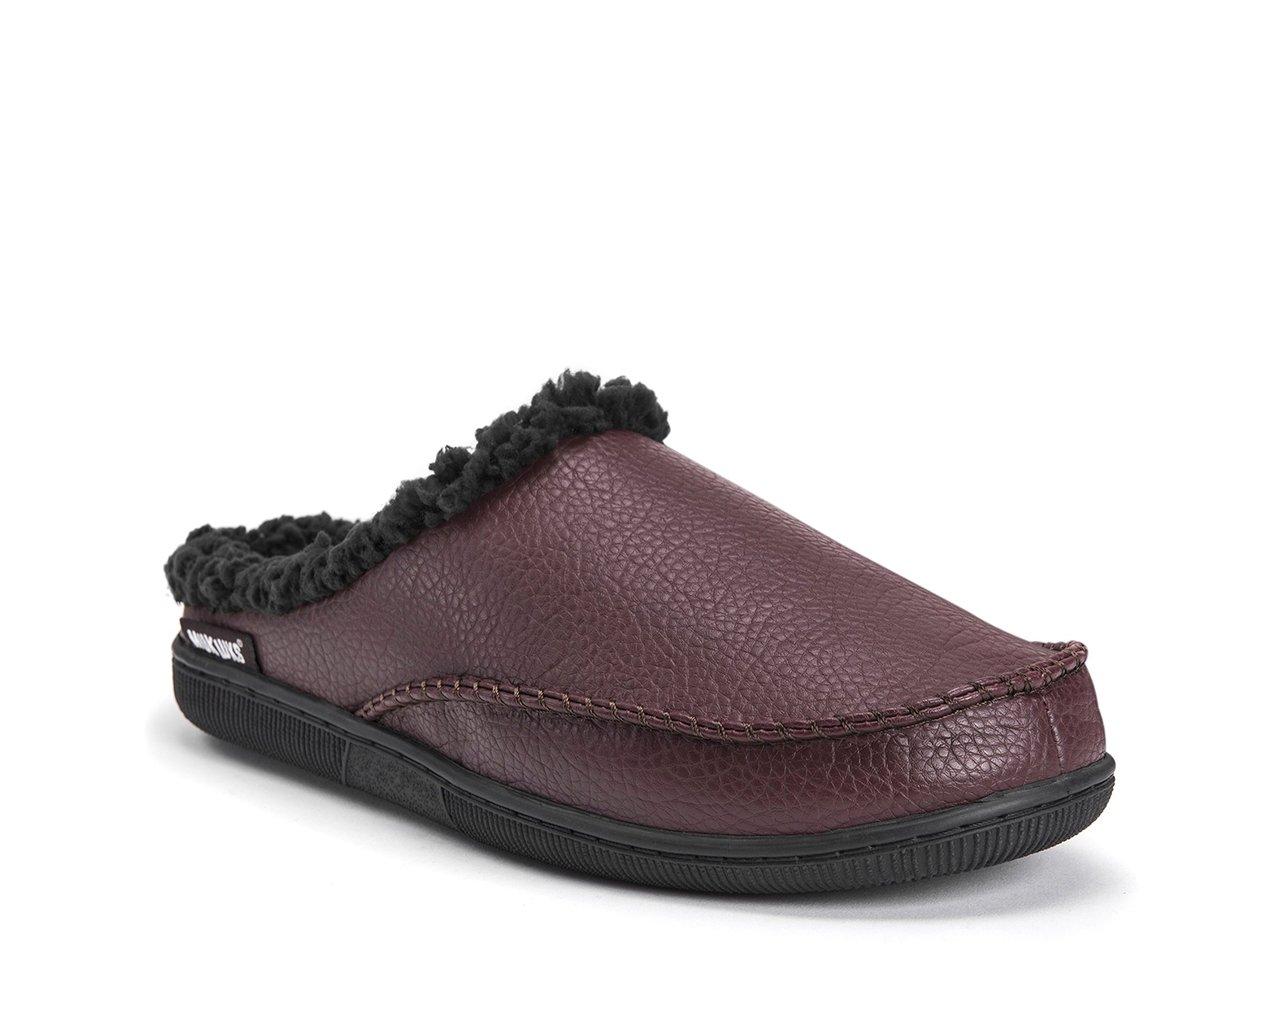 MUK LUKS Men's Faux Leather Clog Slippers